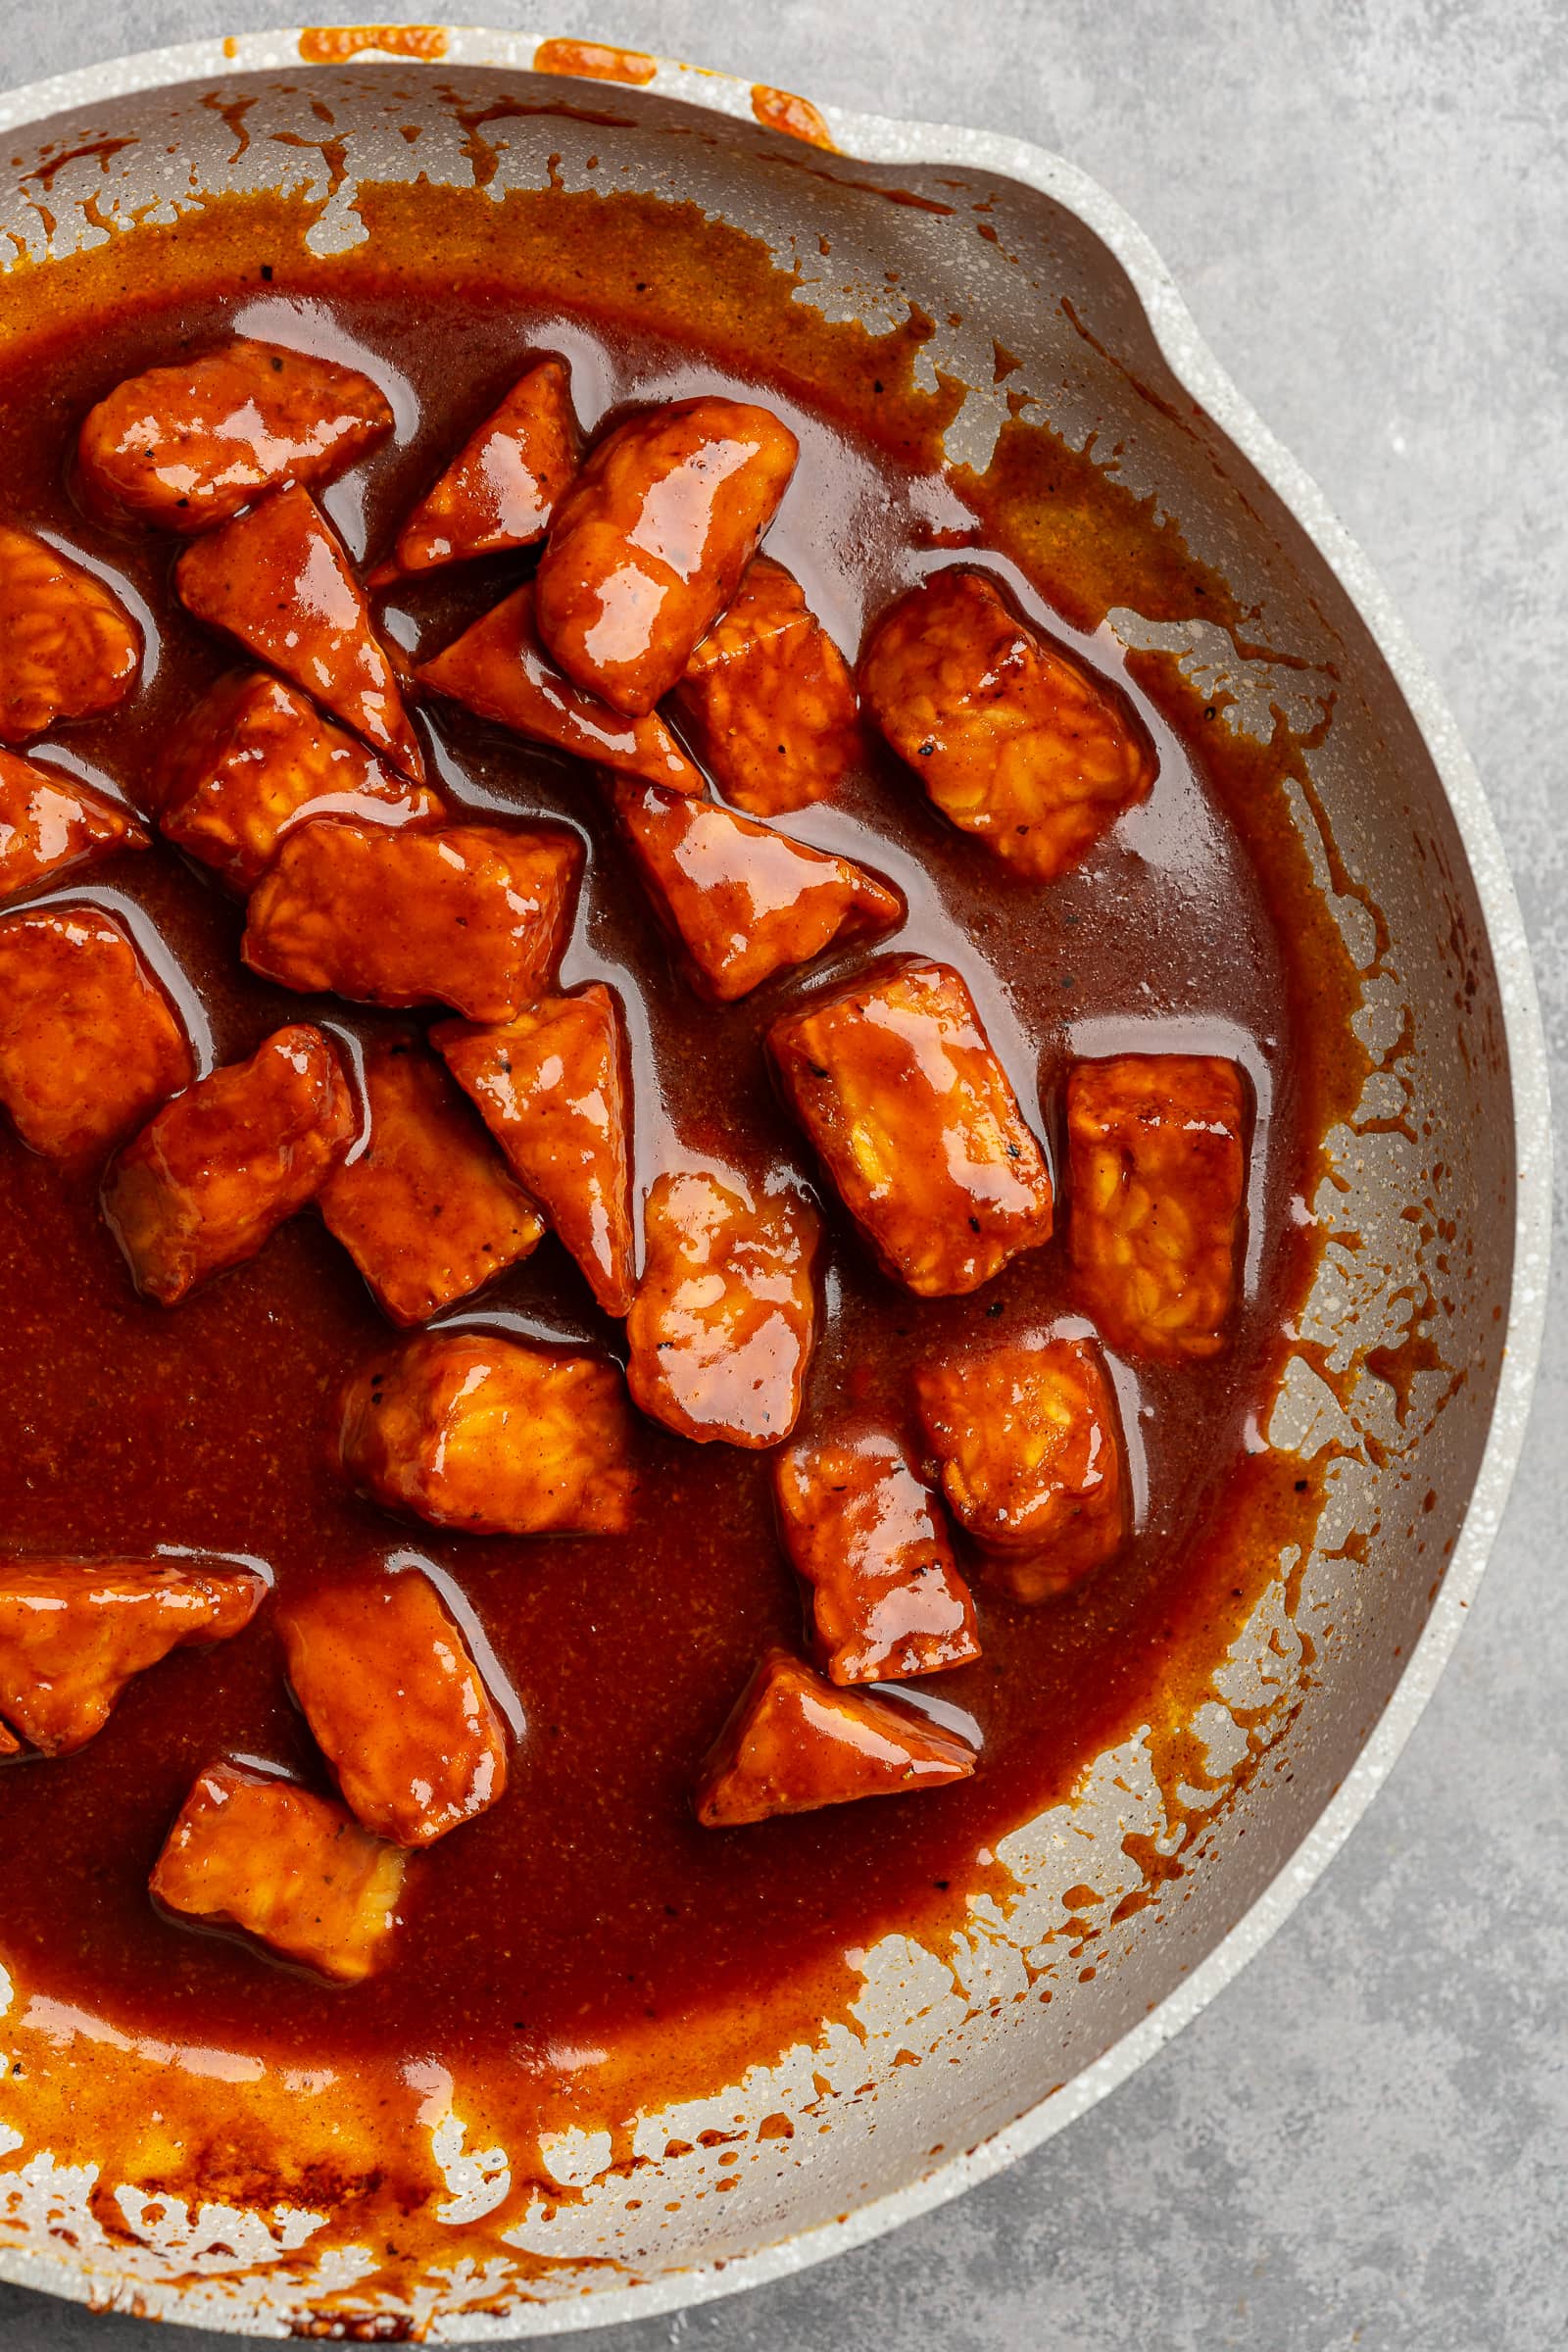 Tempeh simmered in gochujang sauce until coated and thickened.